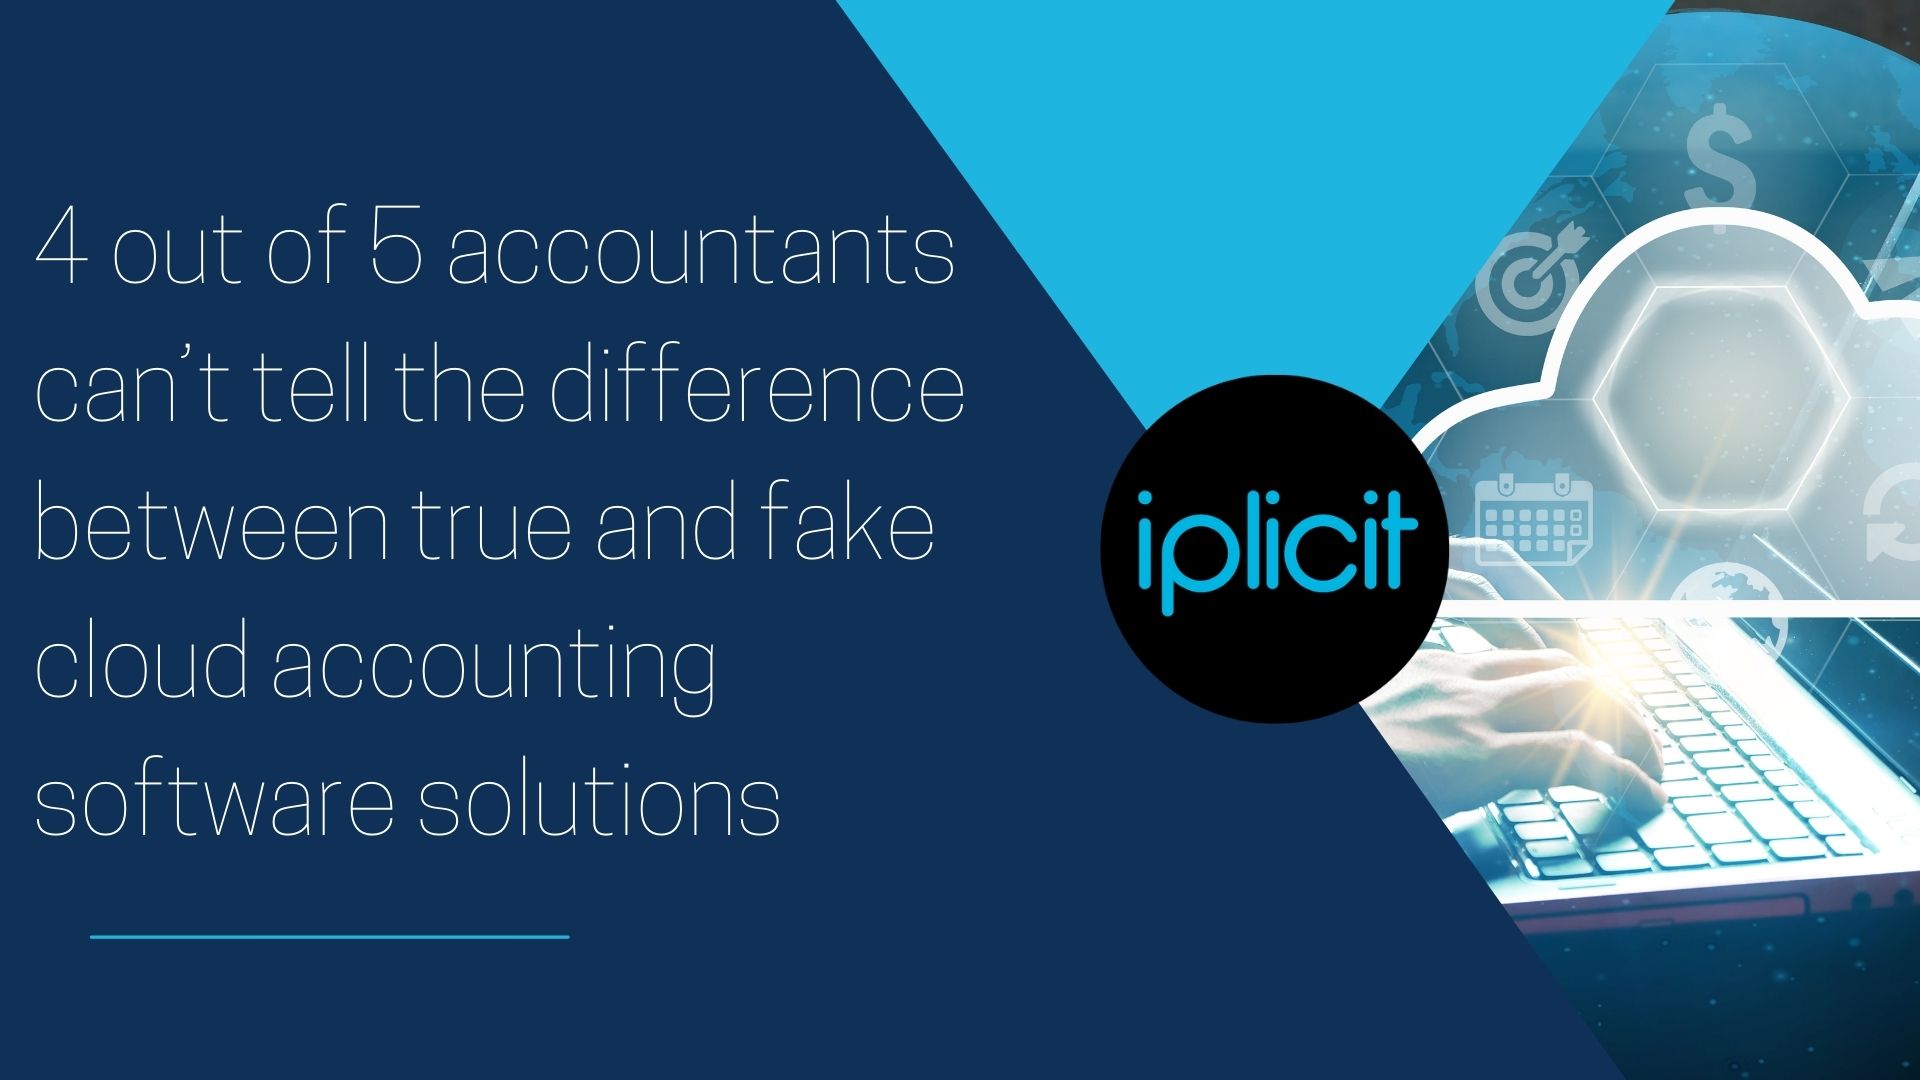 4 out of 5 accountants can’t tell the difference between true and fake cloud accounting software solutions